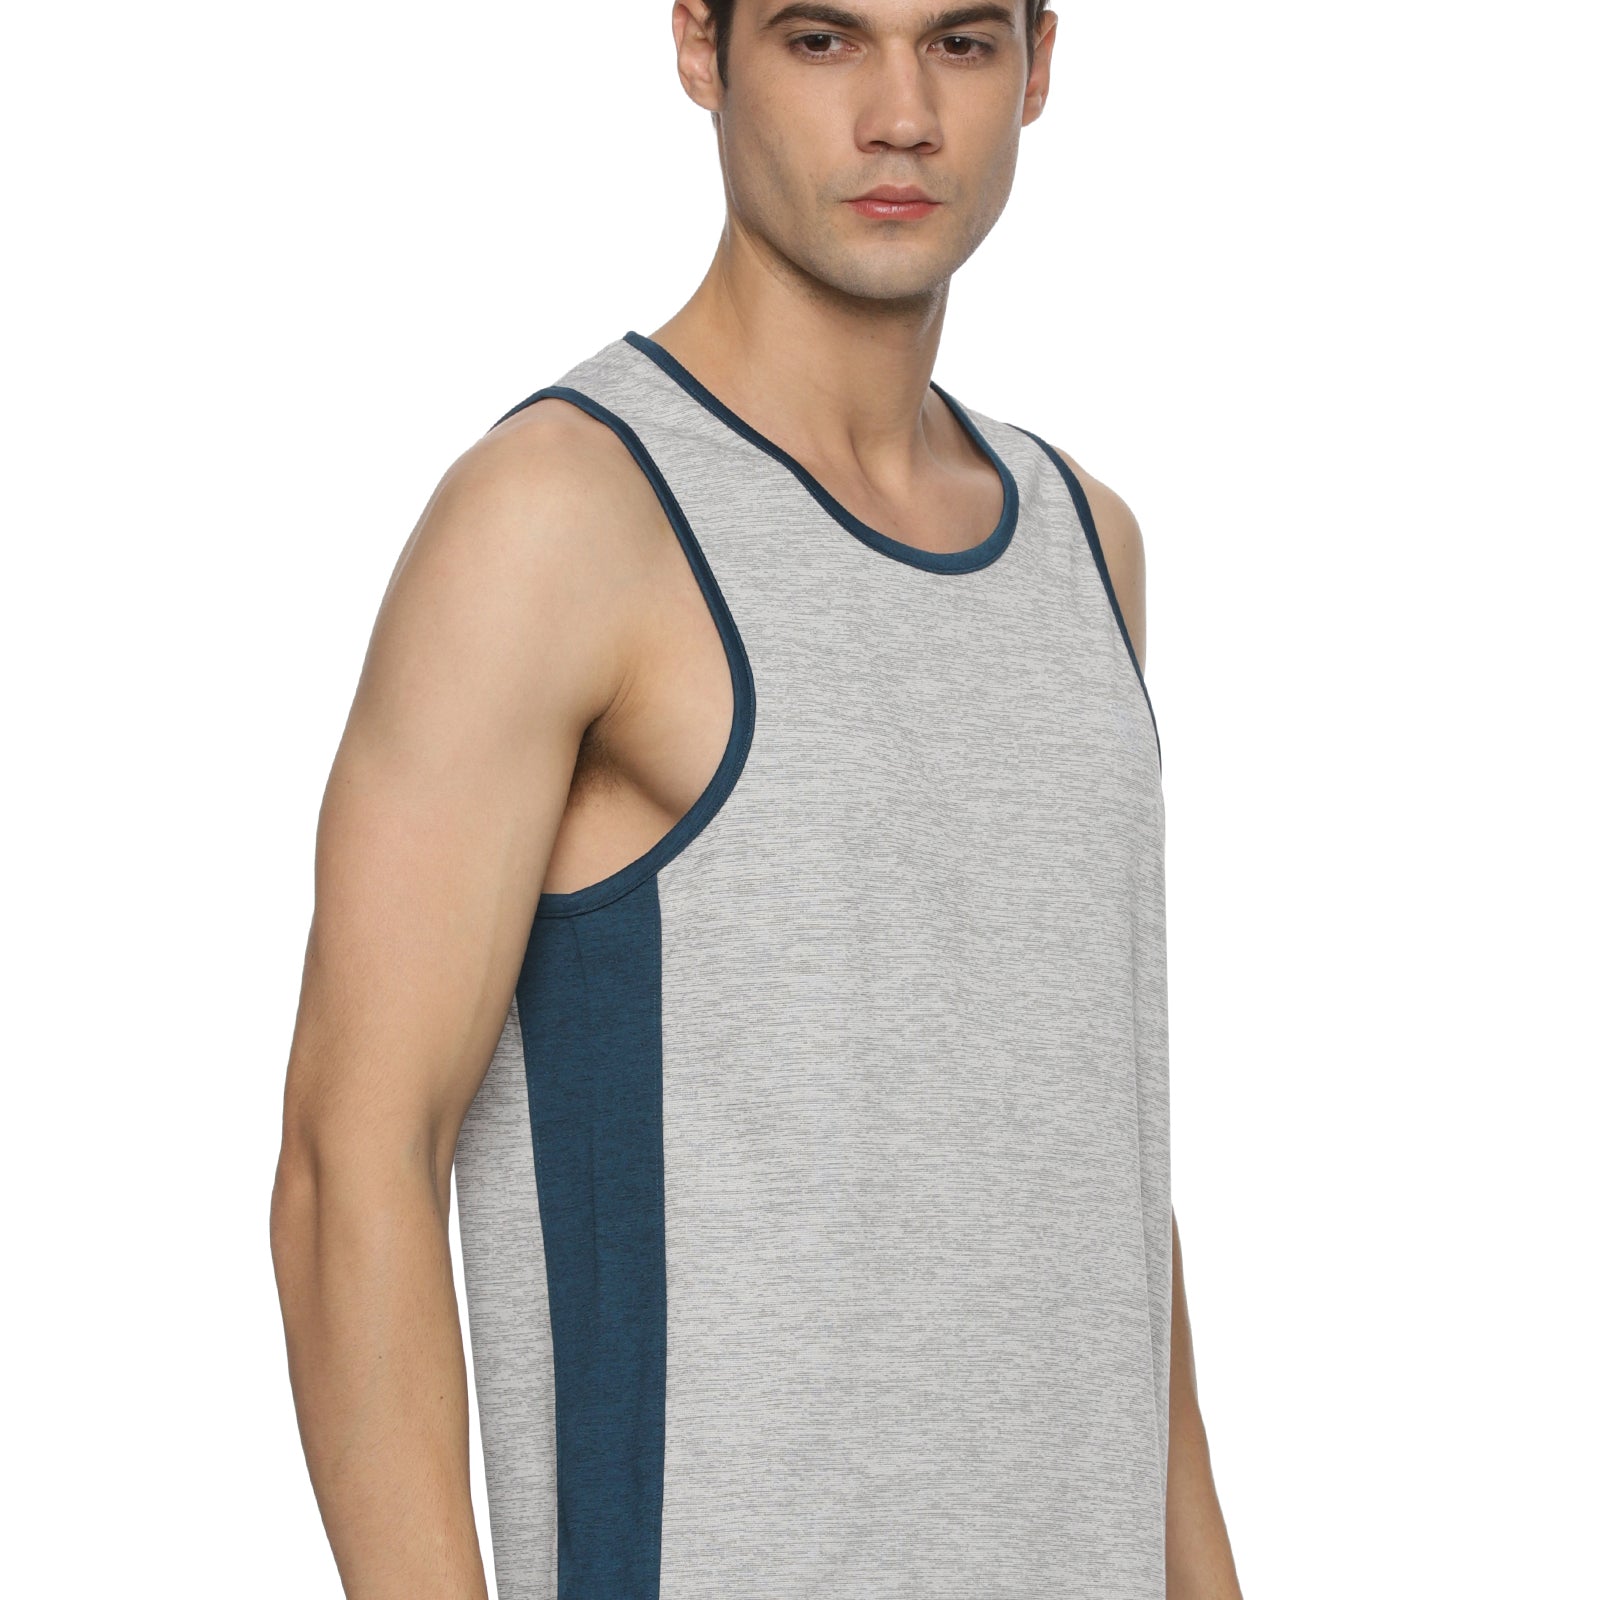 Men Basketball wear with Blue Piping